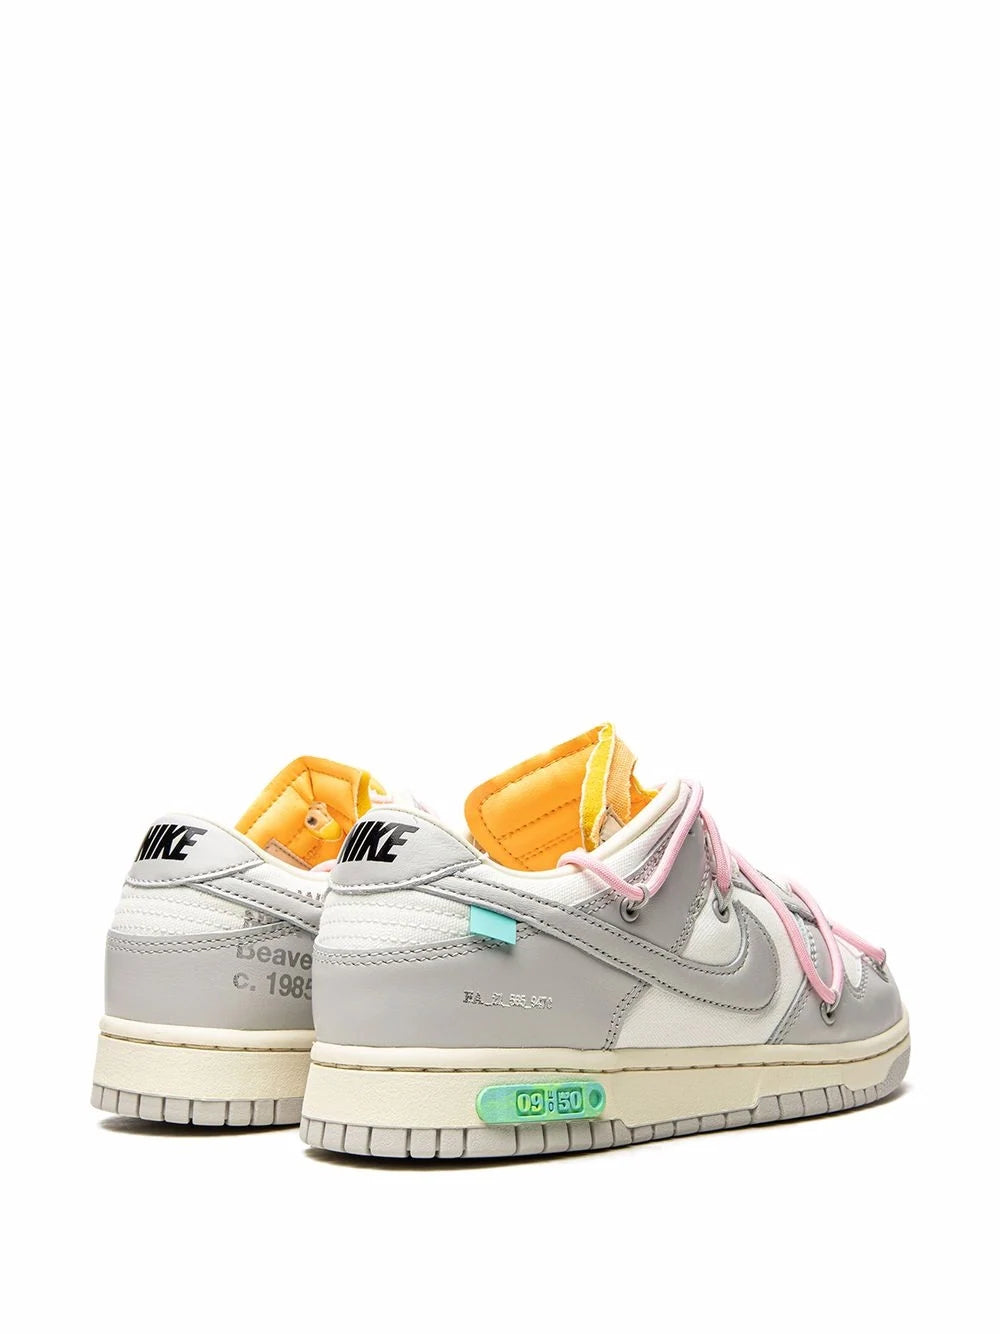 Nike X Off-White lot 09 of 50